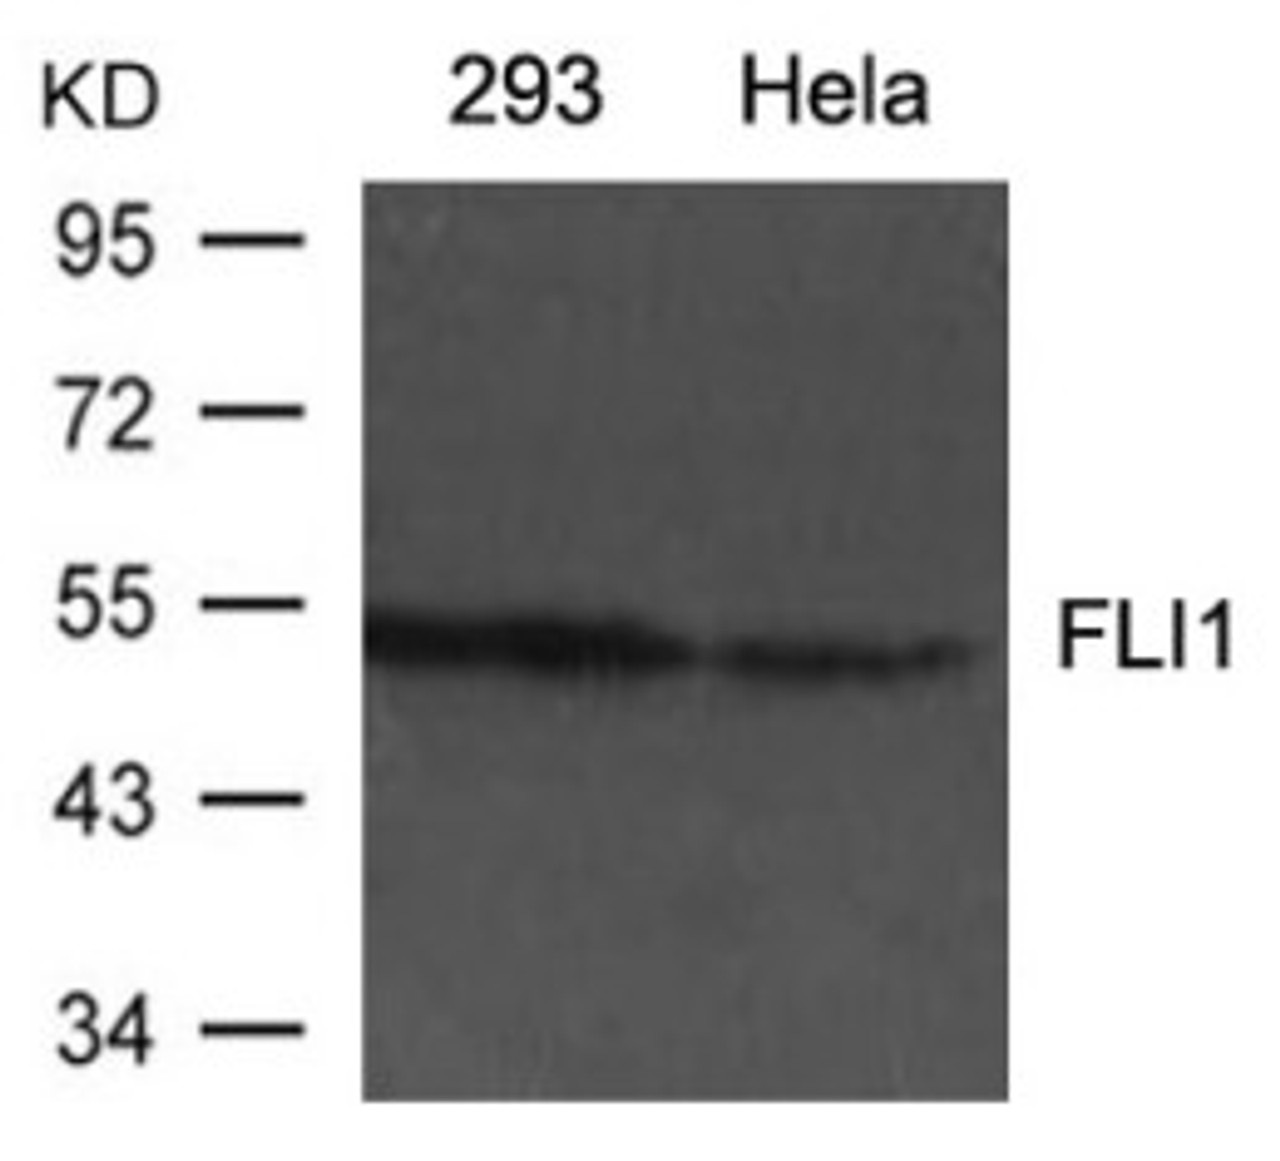 Western blot analysis of lysed extracts from 293 and HeLa cells using FLI1 Antibody.